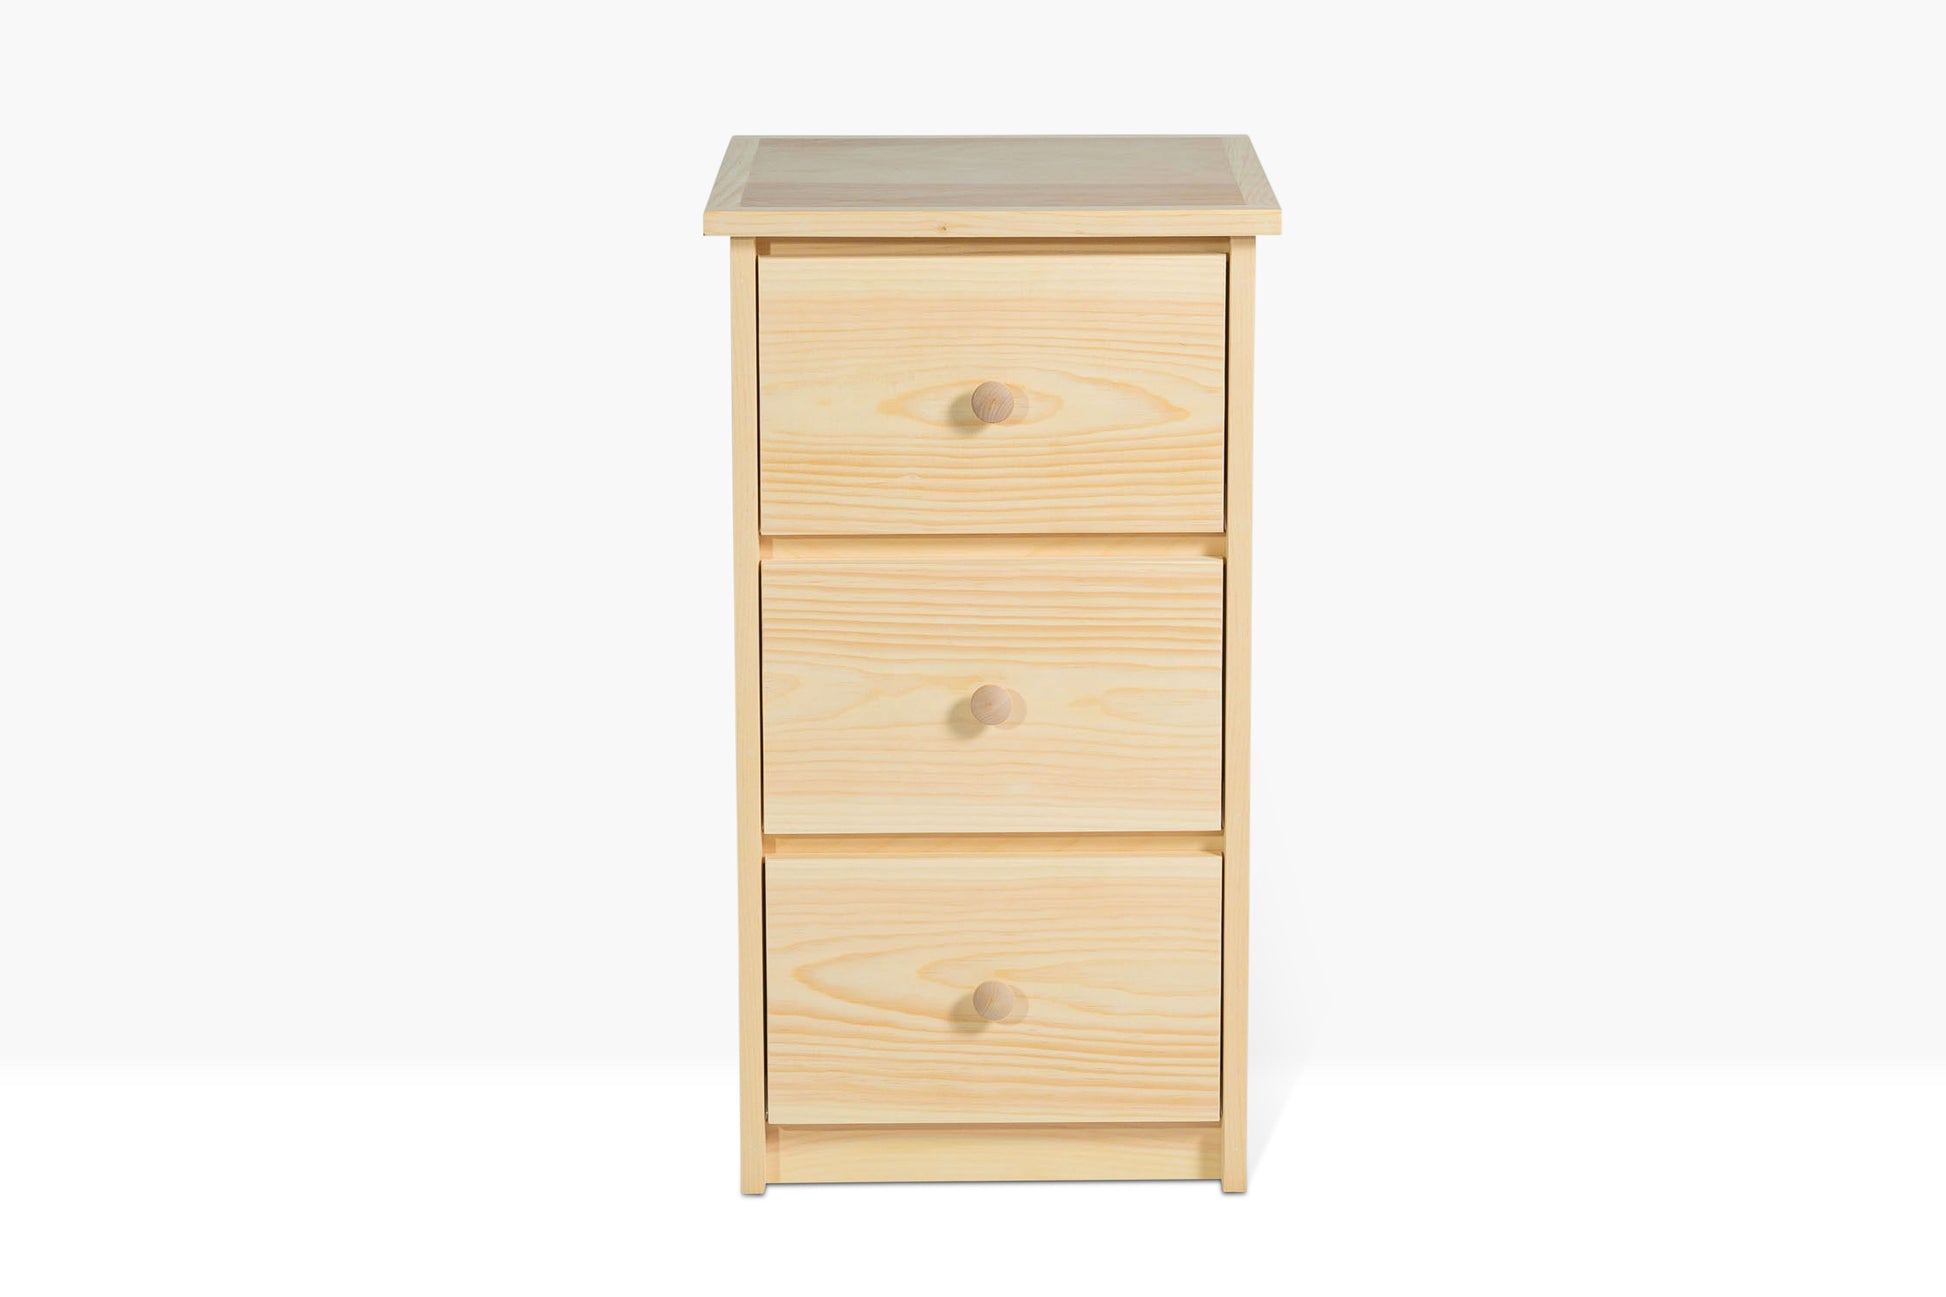 Evergreen Three Drawer Nightsand feature pine construction and three drawers. Shown unfinished.